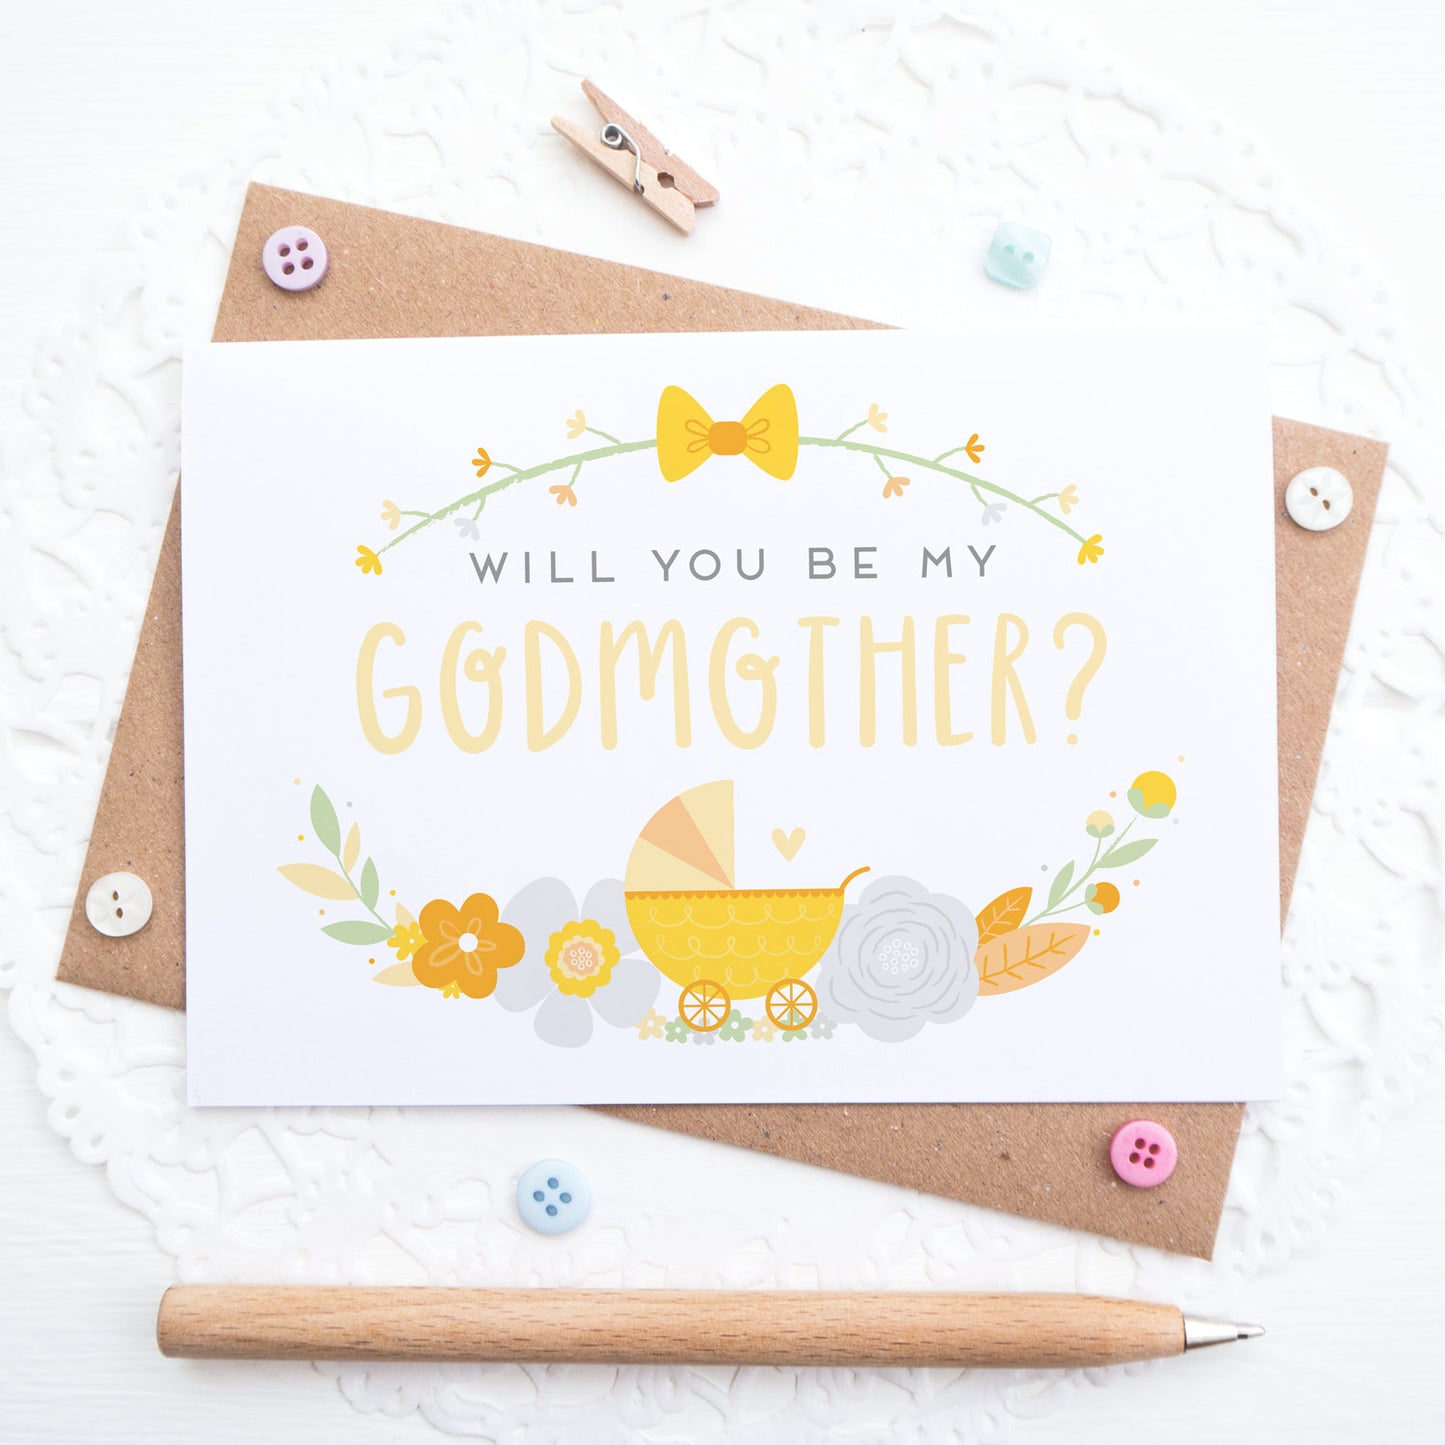 Will you be my Godmother card in yellow and orange